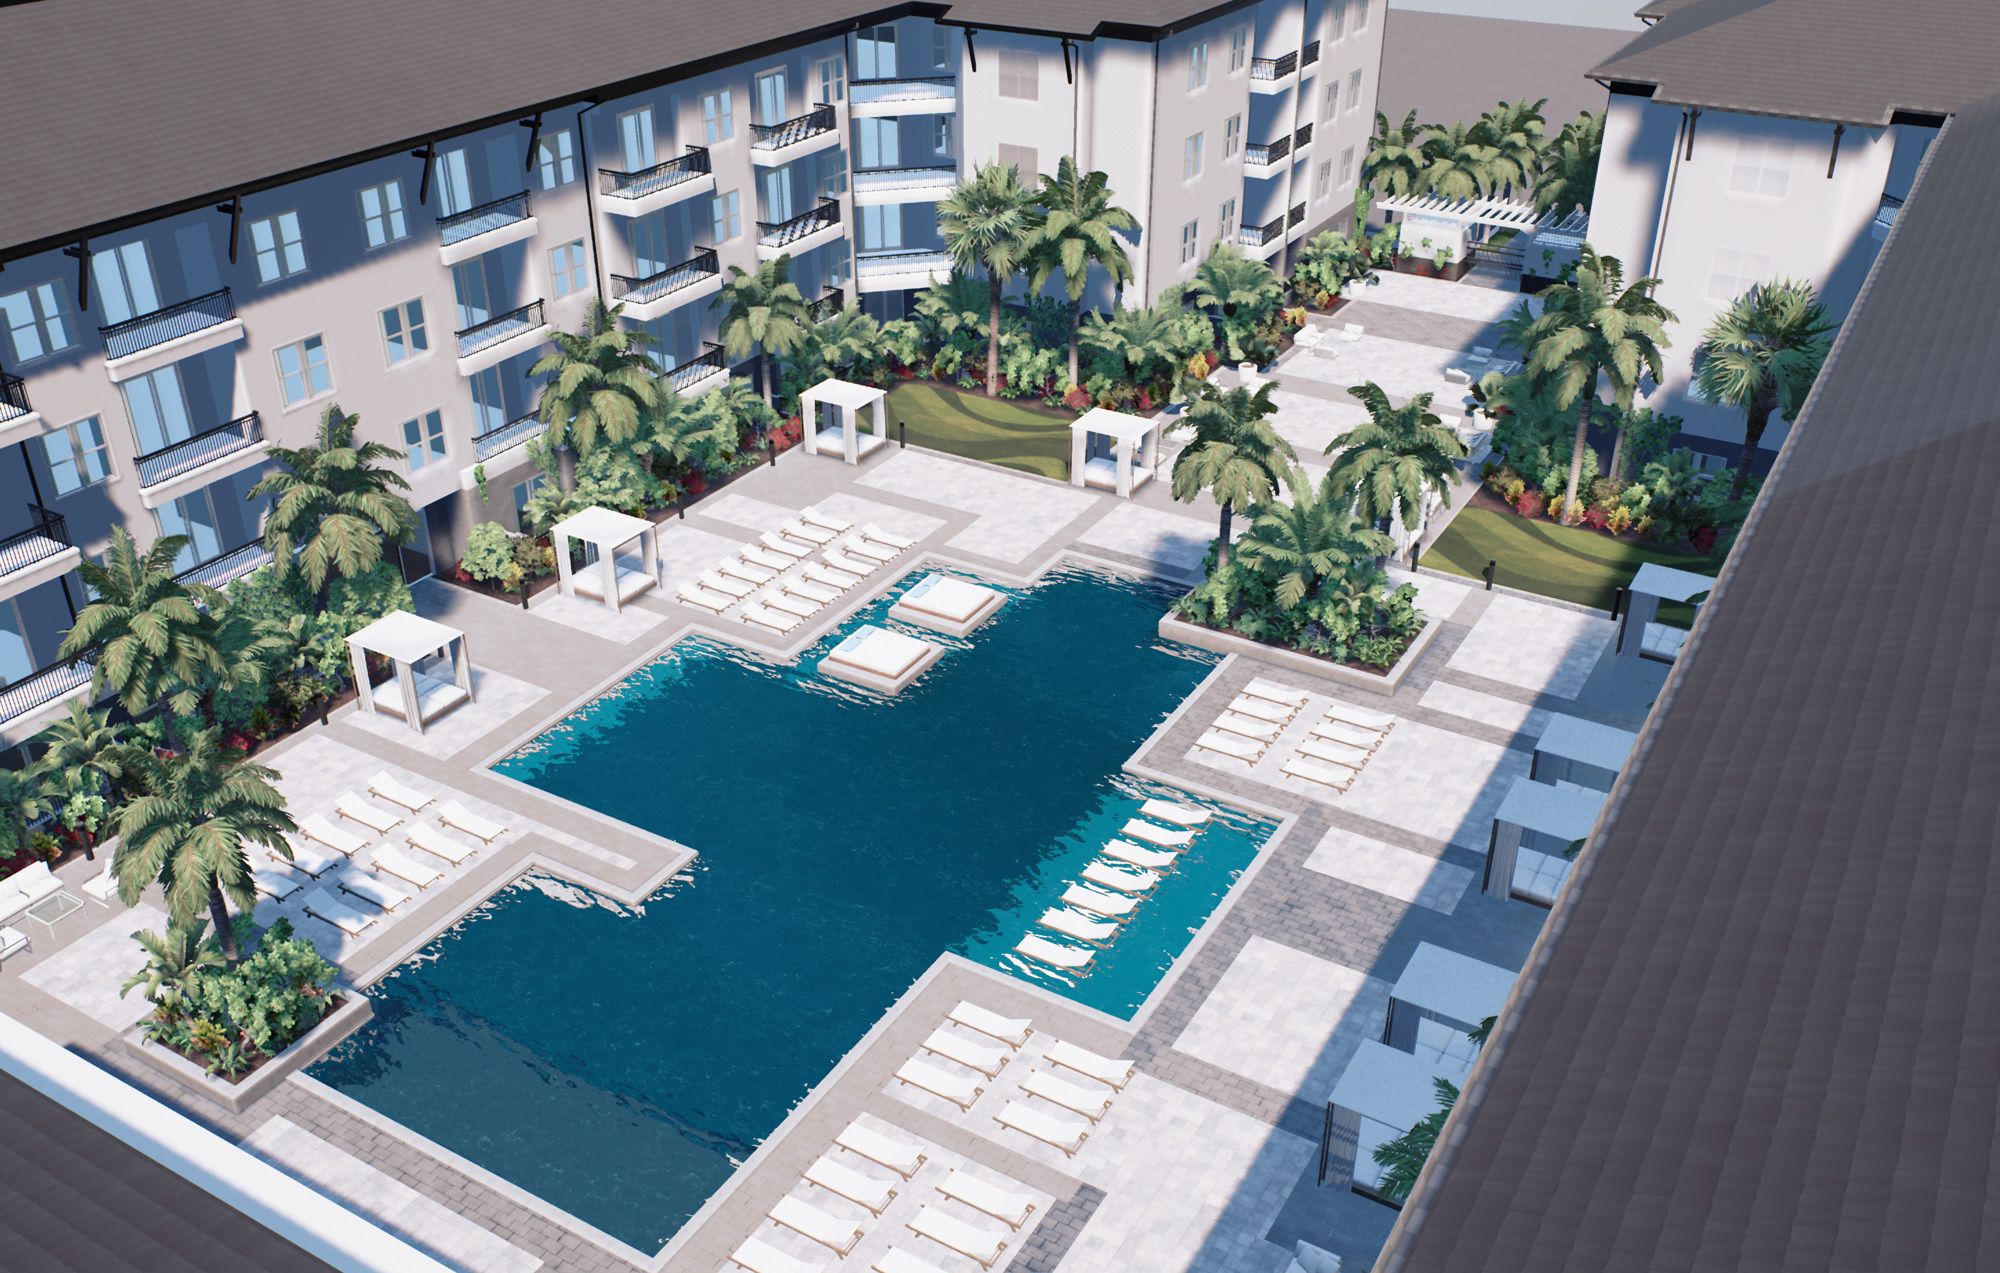 Courtesy. The apartment portion of the development, Citria at Fruitville Commons, will include four residential buildings and a two-story clubhouse overlooking a pool.